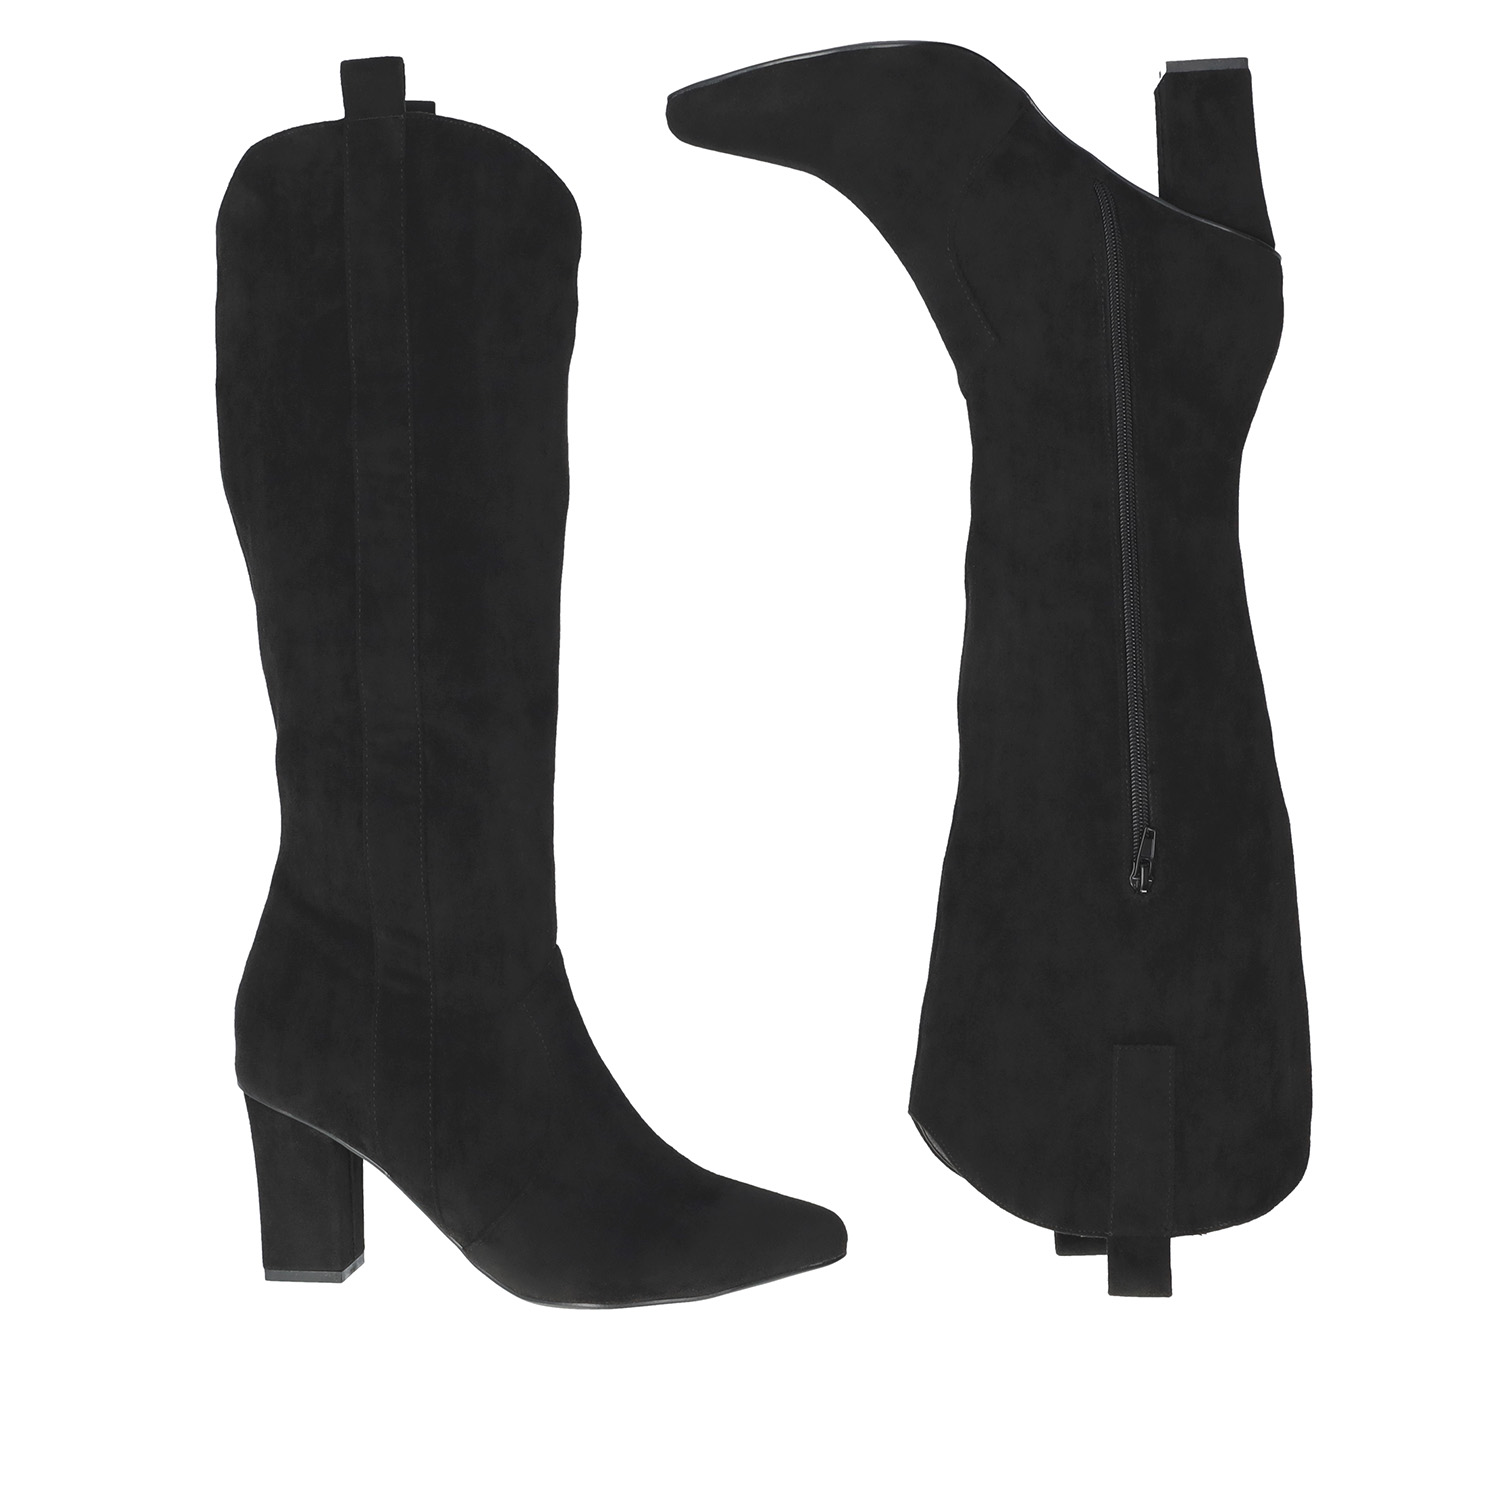 Heeled high boots in black faux suede. 